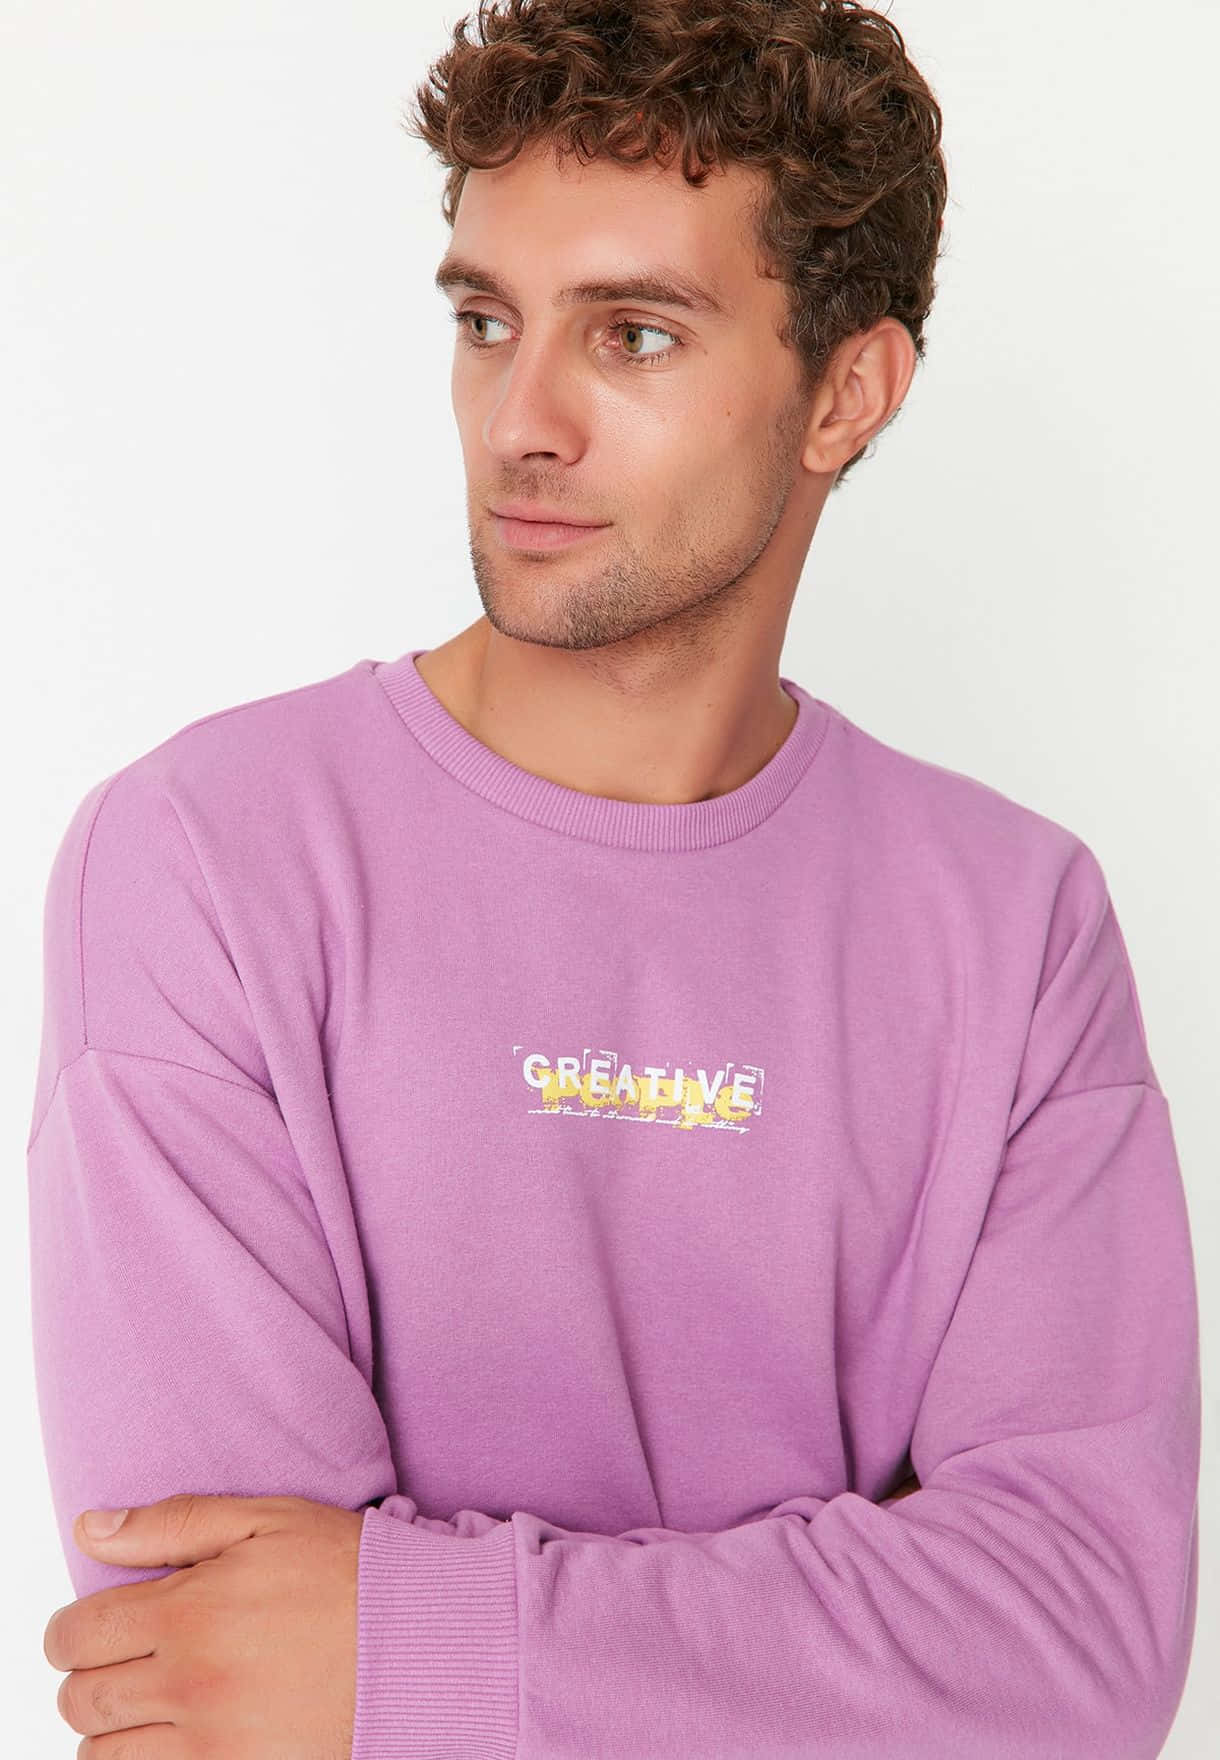 Stay cozy and stylish with this Purple Sweatshirt Wallpaper